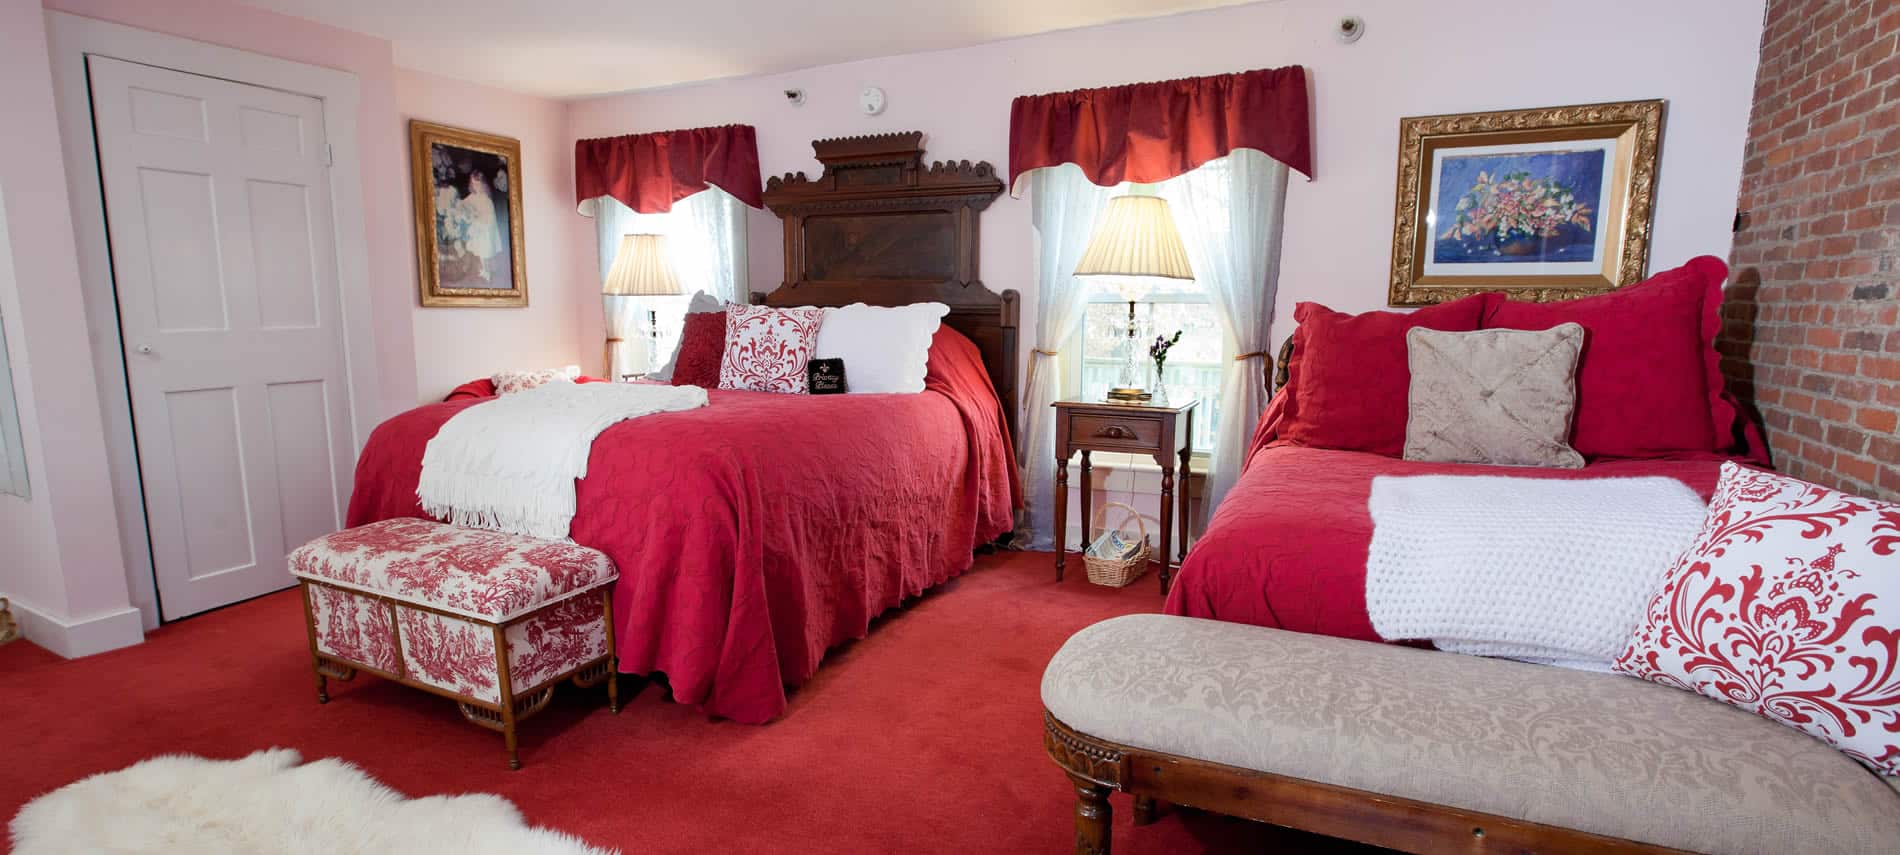 Prince Alfred guest room with two windows, two beds with red bedding and red carpet